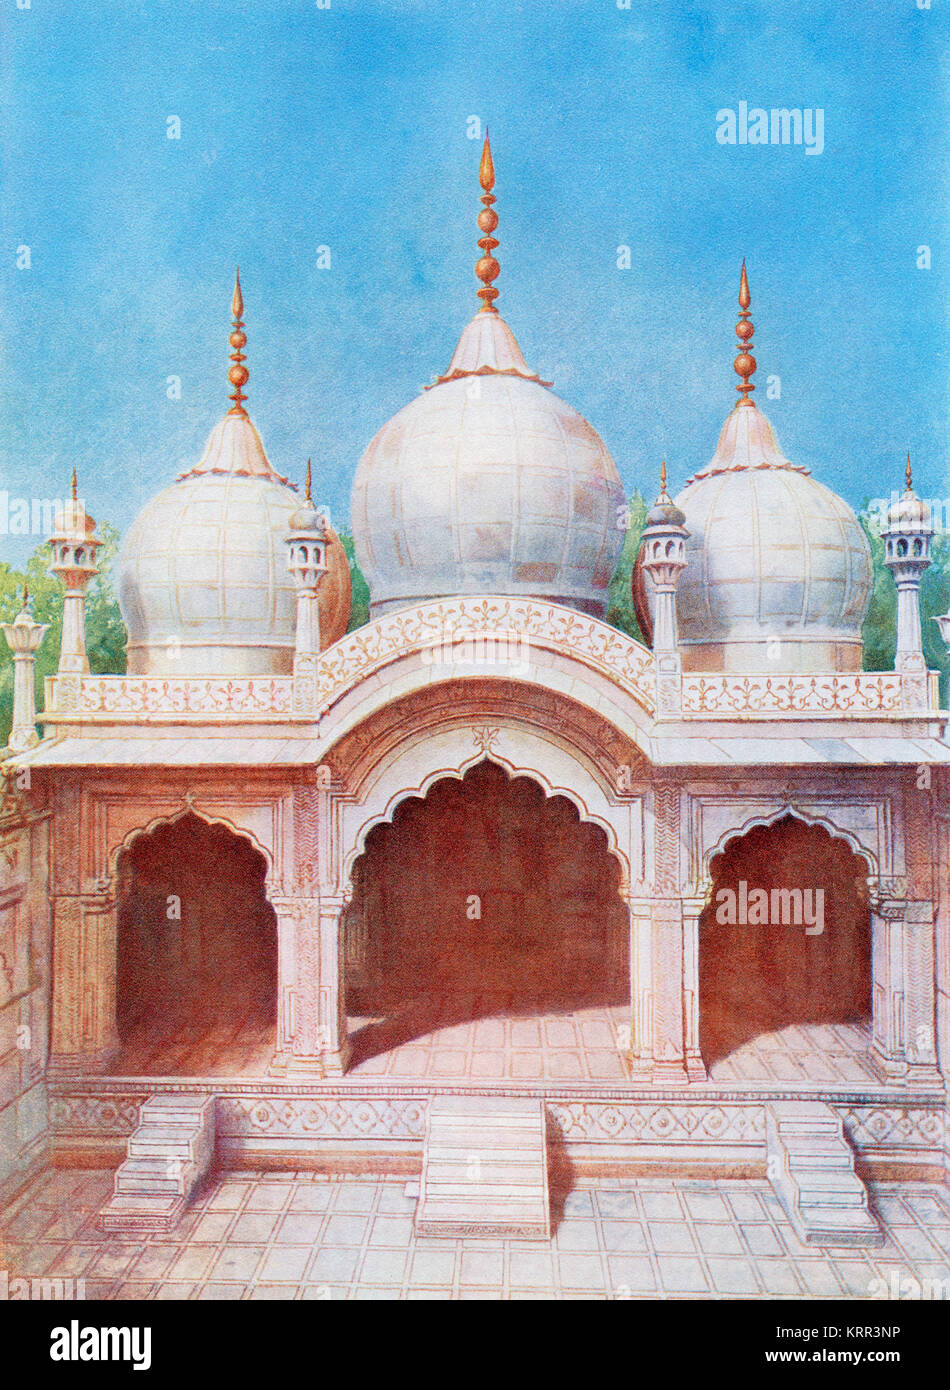 The Moti Masjid aka Pearl Mosque, a white marble mosque inside the Red Fort complex in Delhi, India, it was built by the Mughal emperor Aurangzeb from 1659-1660.  From The Wonders of the World, published c.1920. Stock Photo